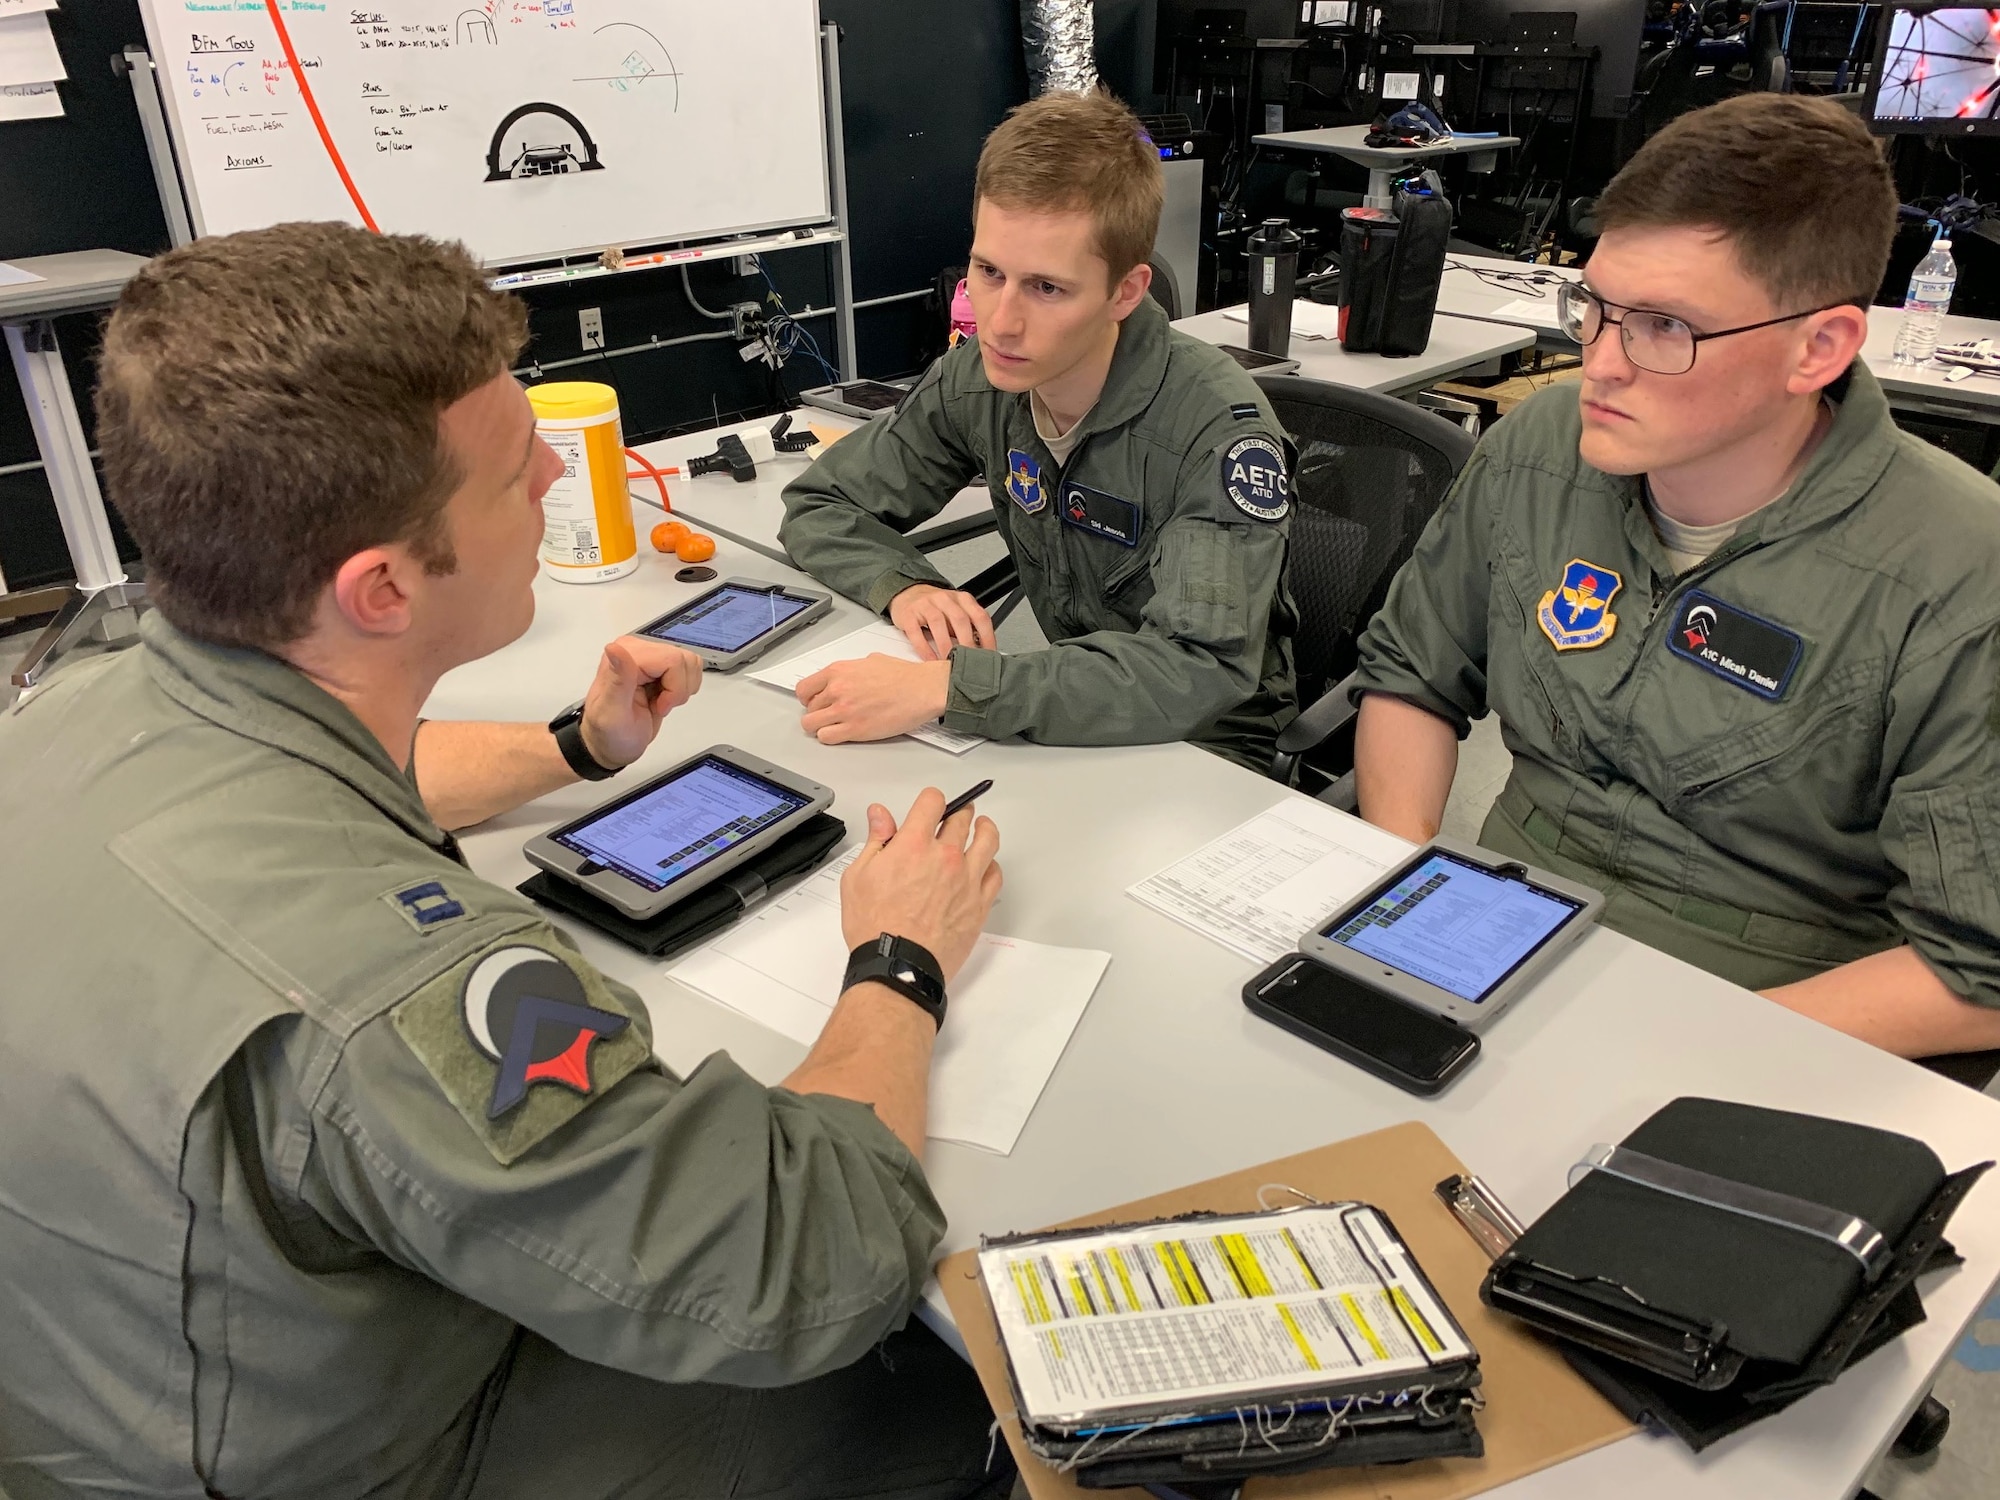 U.S. Air Force Capt. Jonathan Leetch, Pilot Training Next instructor pilot, debriefs students Royal Air Force Flight Officer Syd Janota (center), and Airman 1st Class Micah Daniel, after a virtual-reality training sortie at the PTN facility at the Armed Forces Reserve Center in Austin, Texas, March 18, 2019. The RAF is participating in PTN's second iteration in an effort to accelerate learning and increase pilot production. (U.S. Air Force photo/Dan Hawkins)